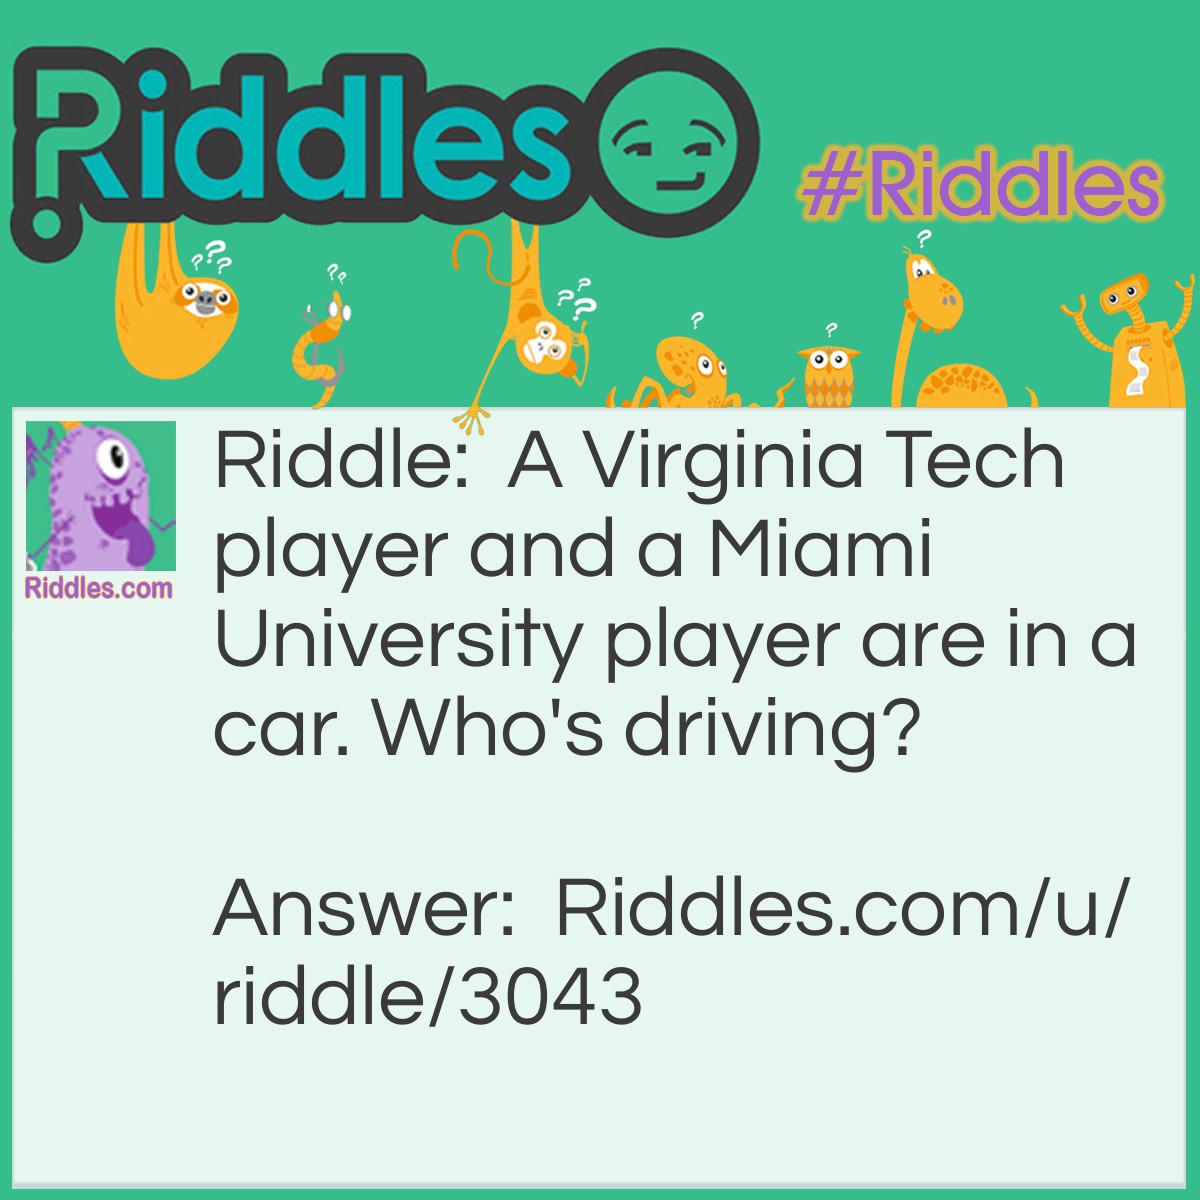 Riddle: A Virginia Tech player and a Miami University player are in a car. Who's driving? Answer: The police!